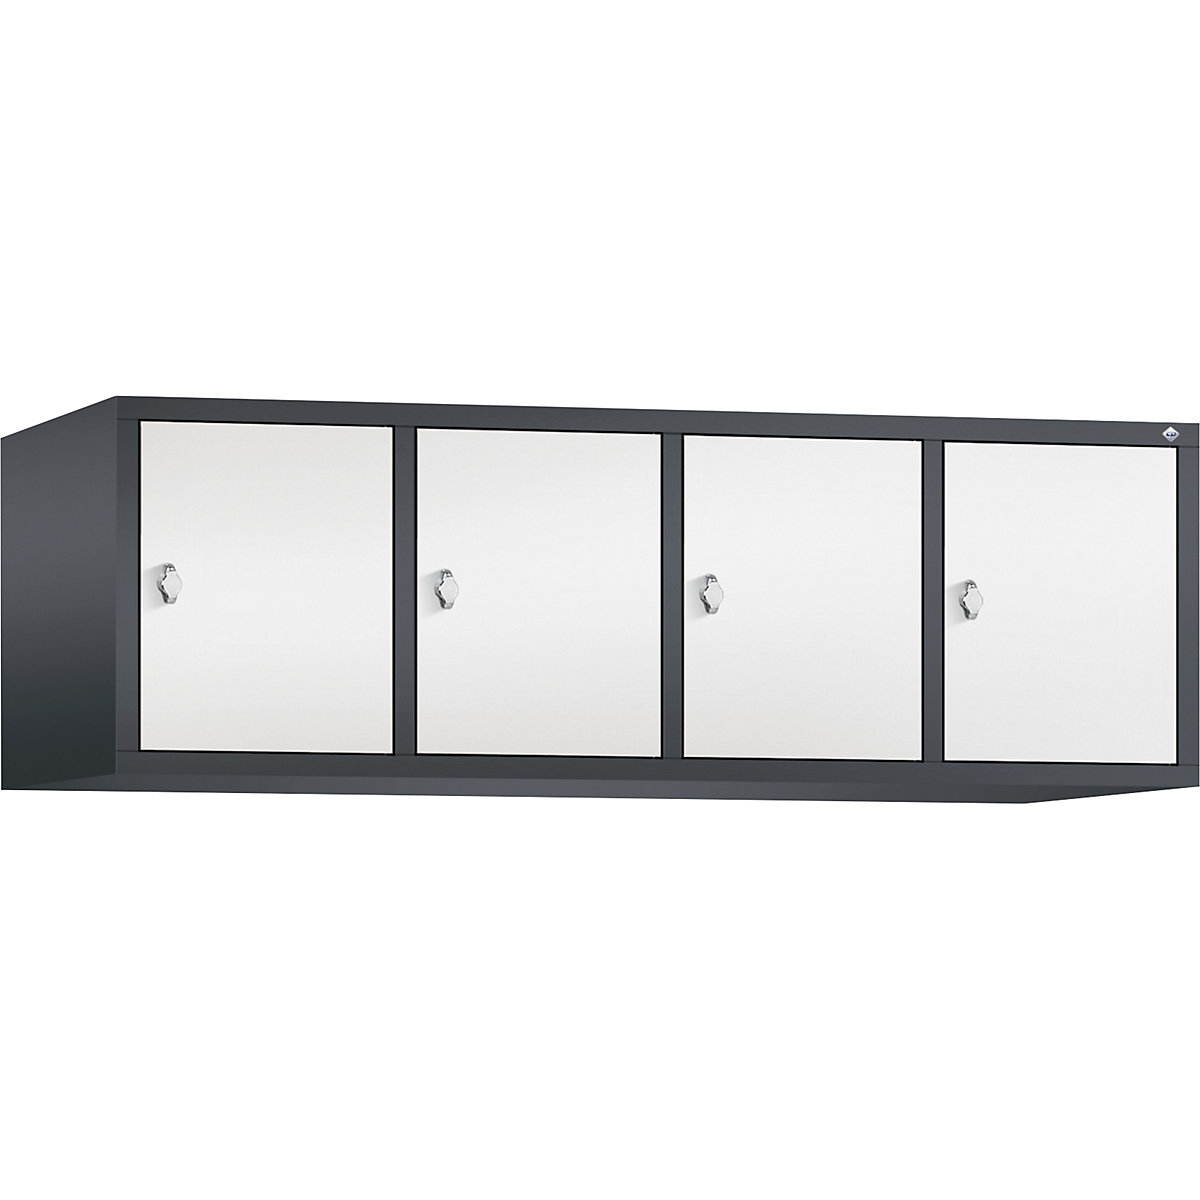 CLASSIC add-on cupboard – C+P, 4 compartments, compartment width 400 mm, black grey / traffic white-6